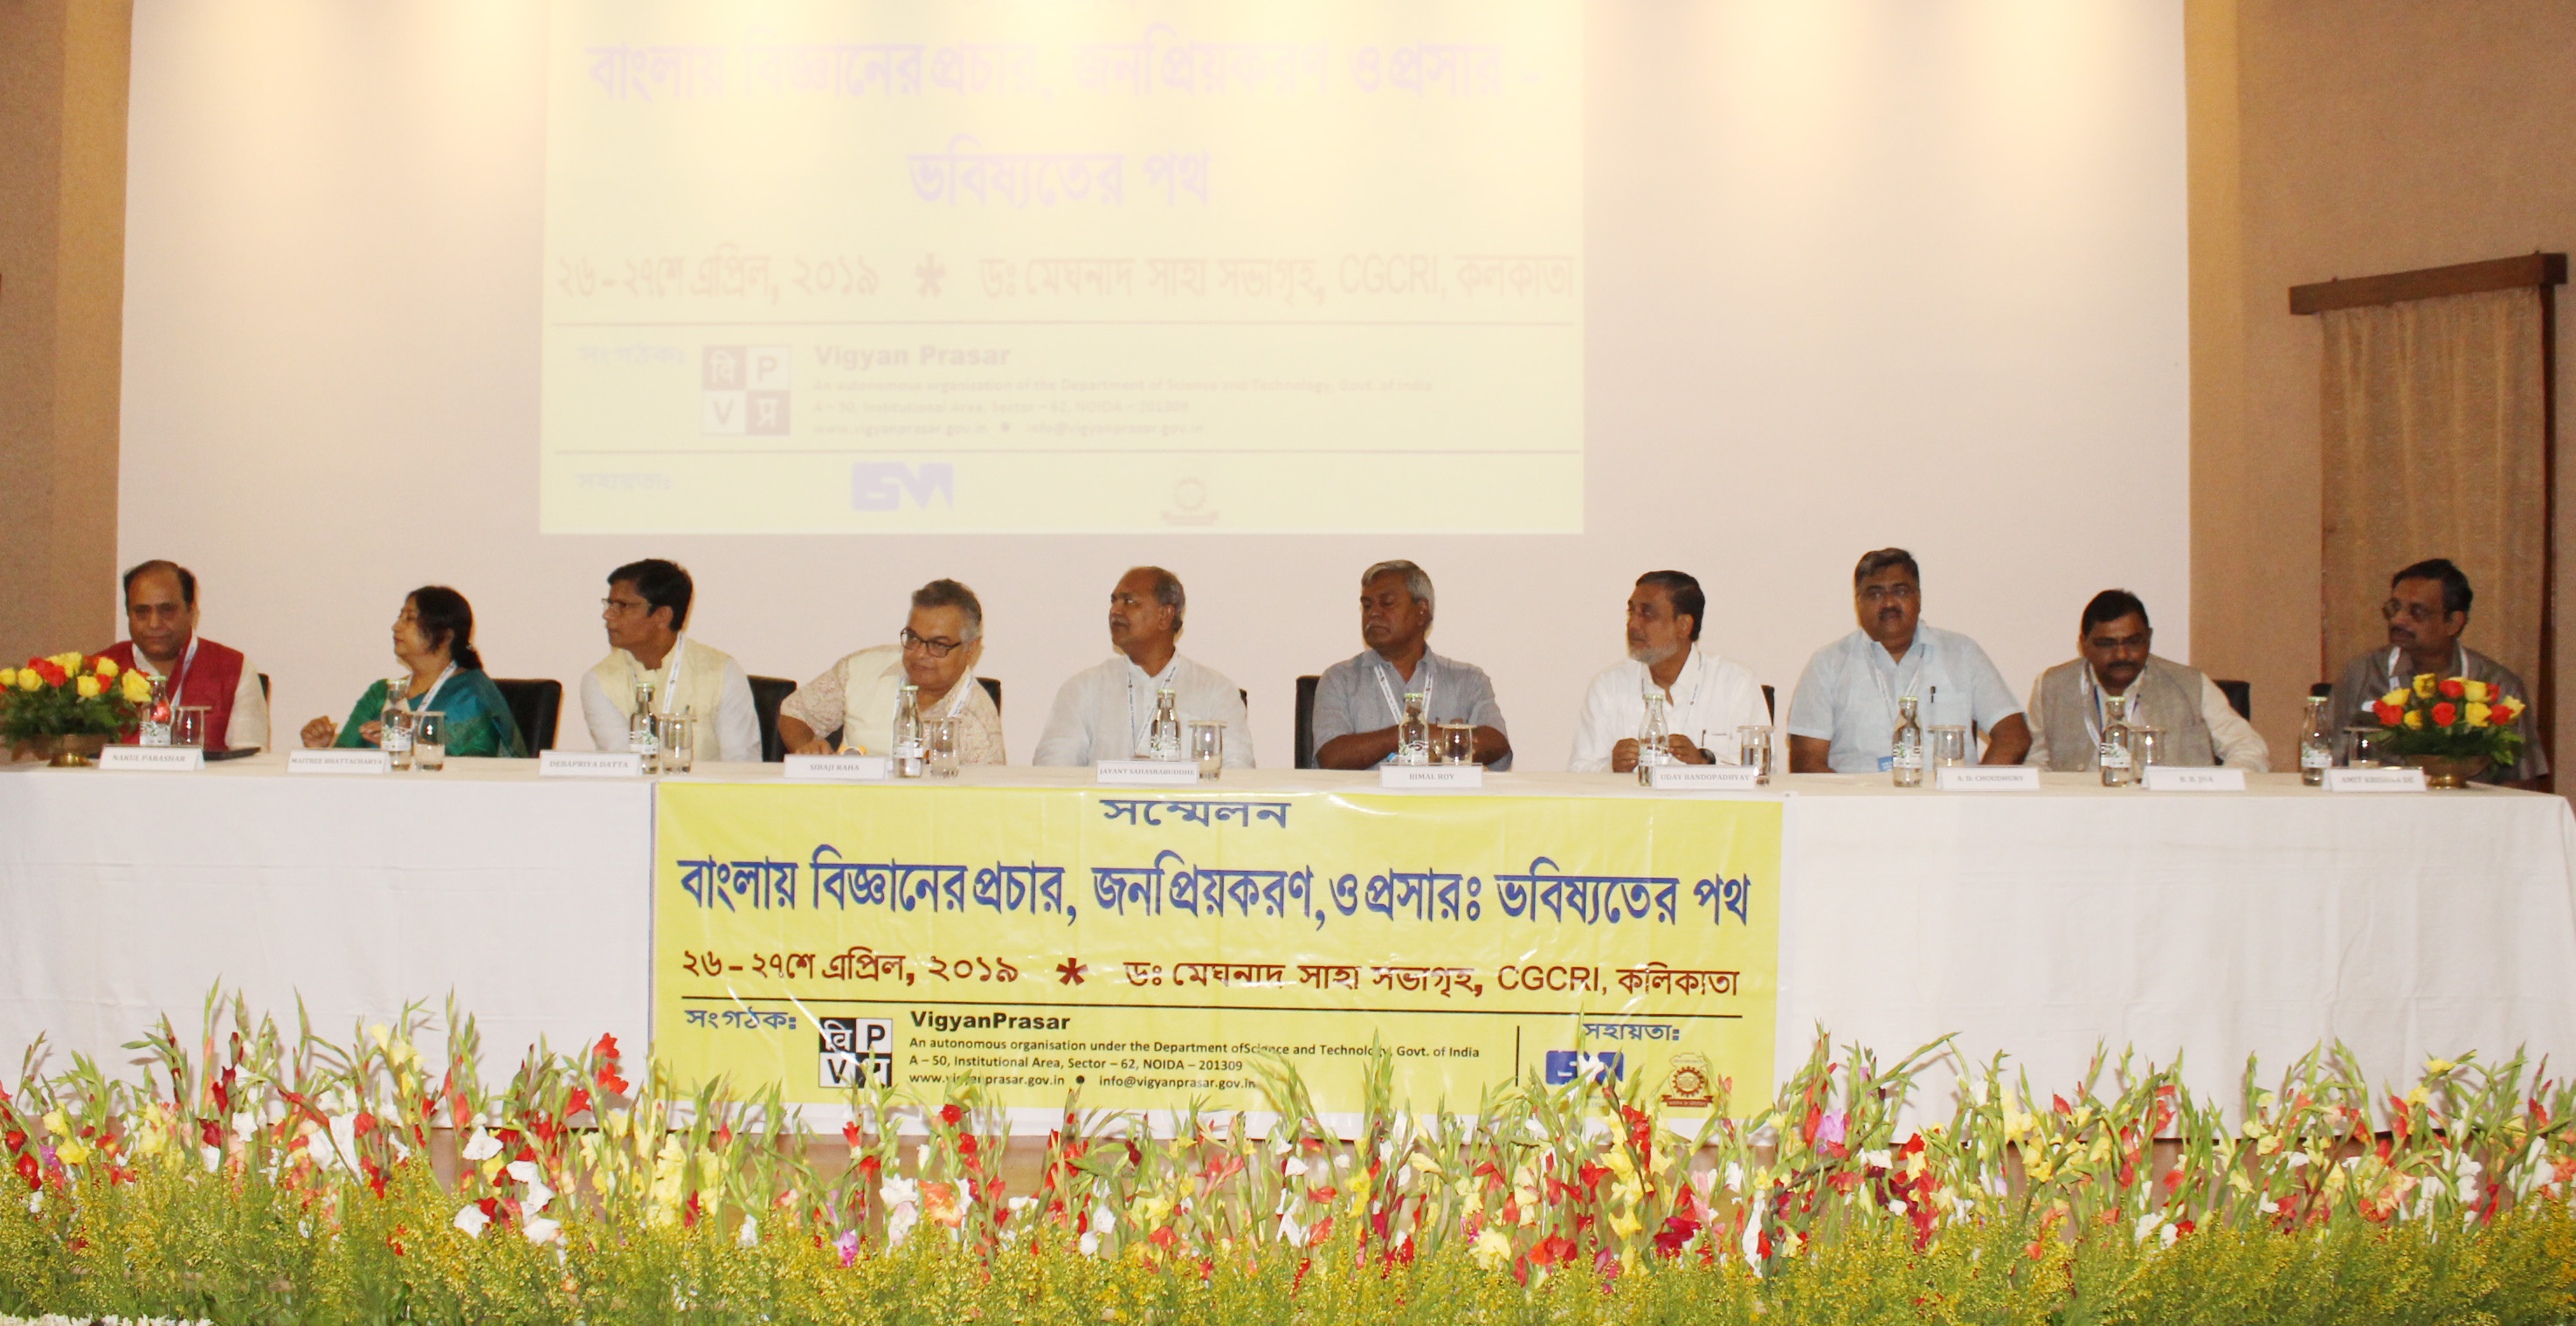 Conference: Scinece communication, popularisation and extension in Bengali-the road ahead, during 26 - 27 April, 2019 at CGCRI, Kolkata